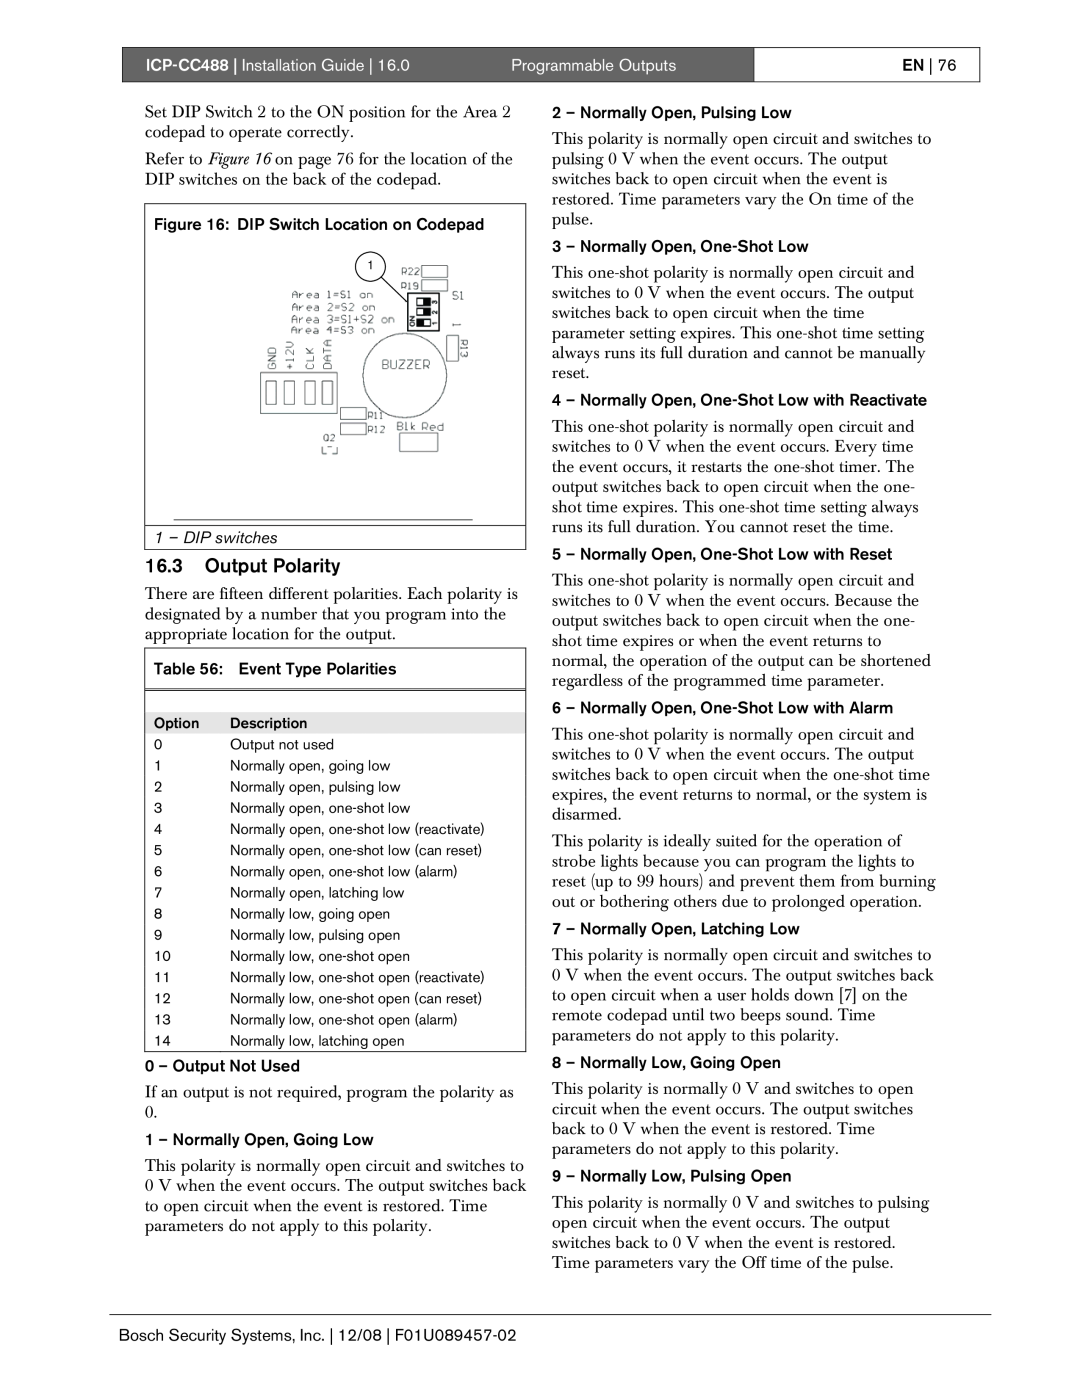 Bosch Appliances manual 16.3Output Polarity, ICP-CC488| Installation Guide, Programmable Outputs 